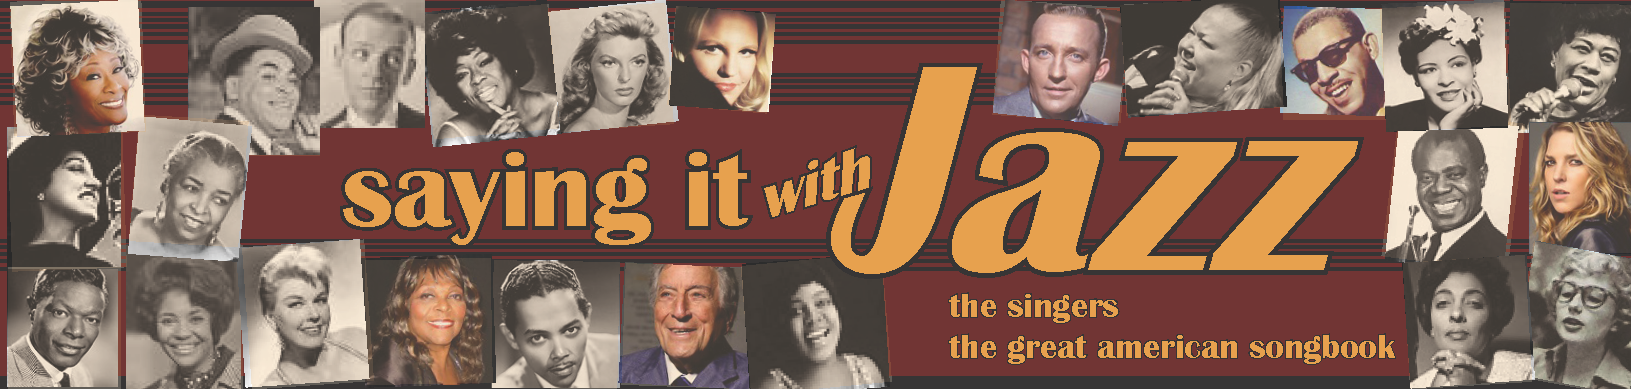 Graphic with photos of jazz singers and the words Saying it with Jazz